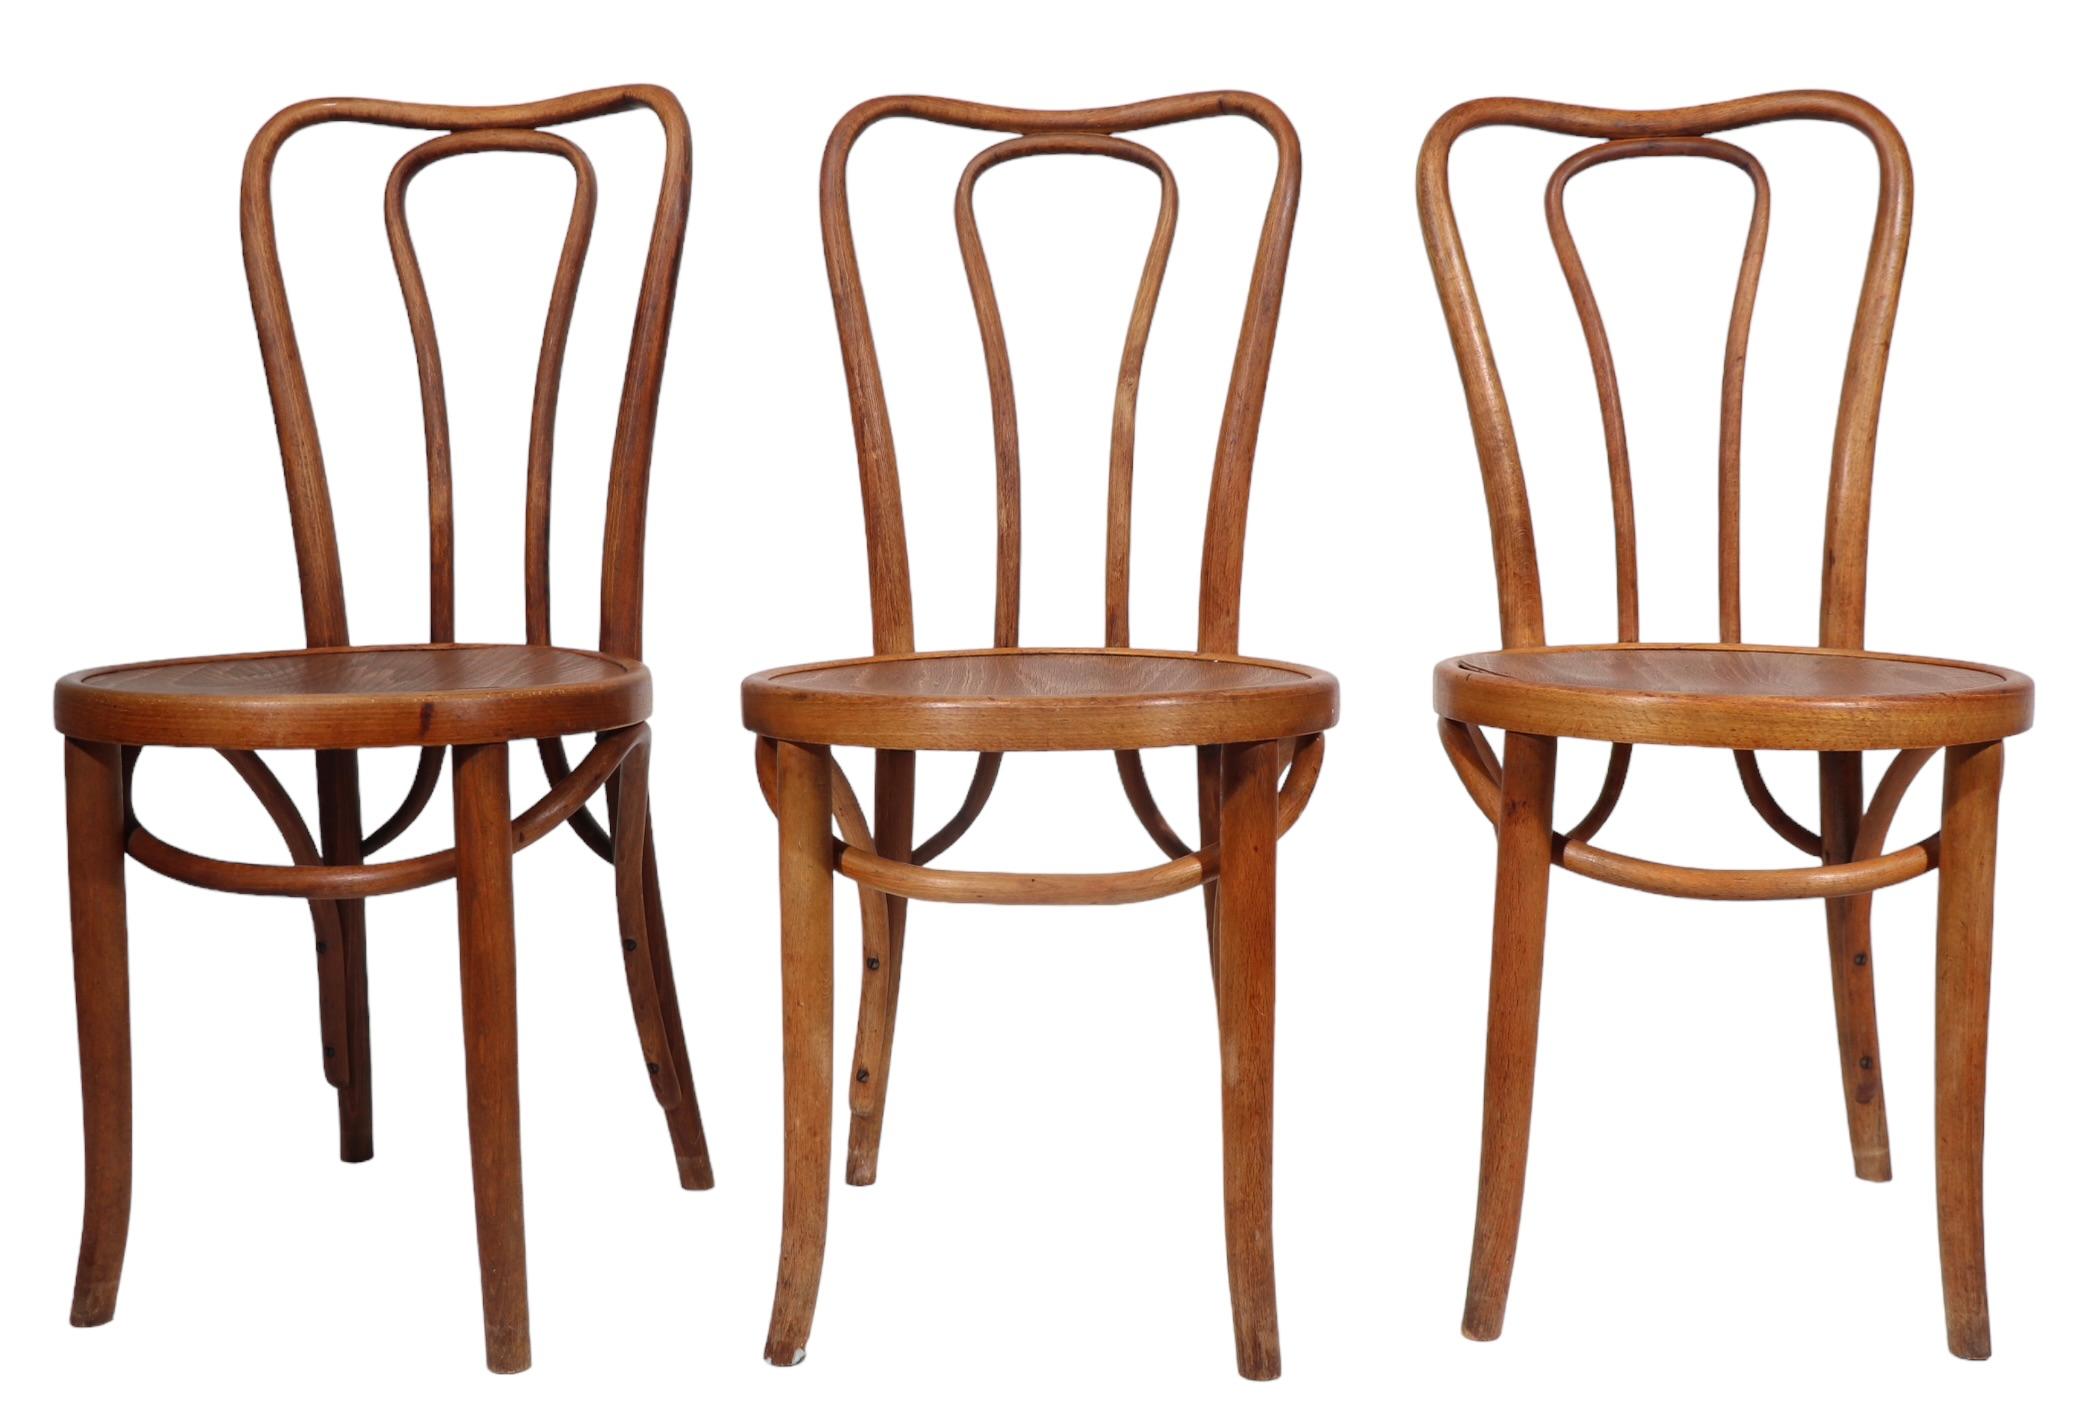 20th Century Vienna Secessionist Bentwood Chairs att. to Thonet  Made in Poland 3 available 